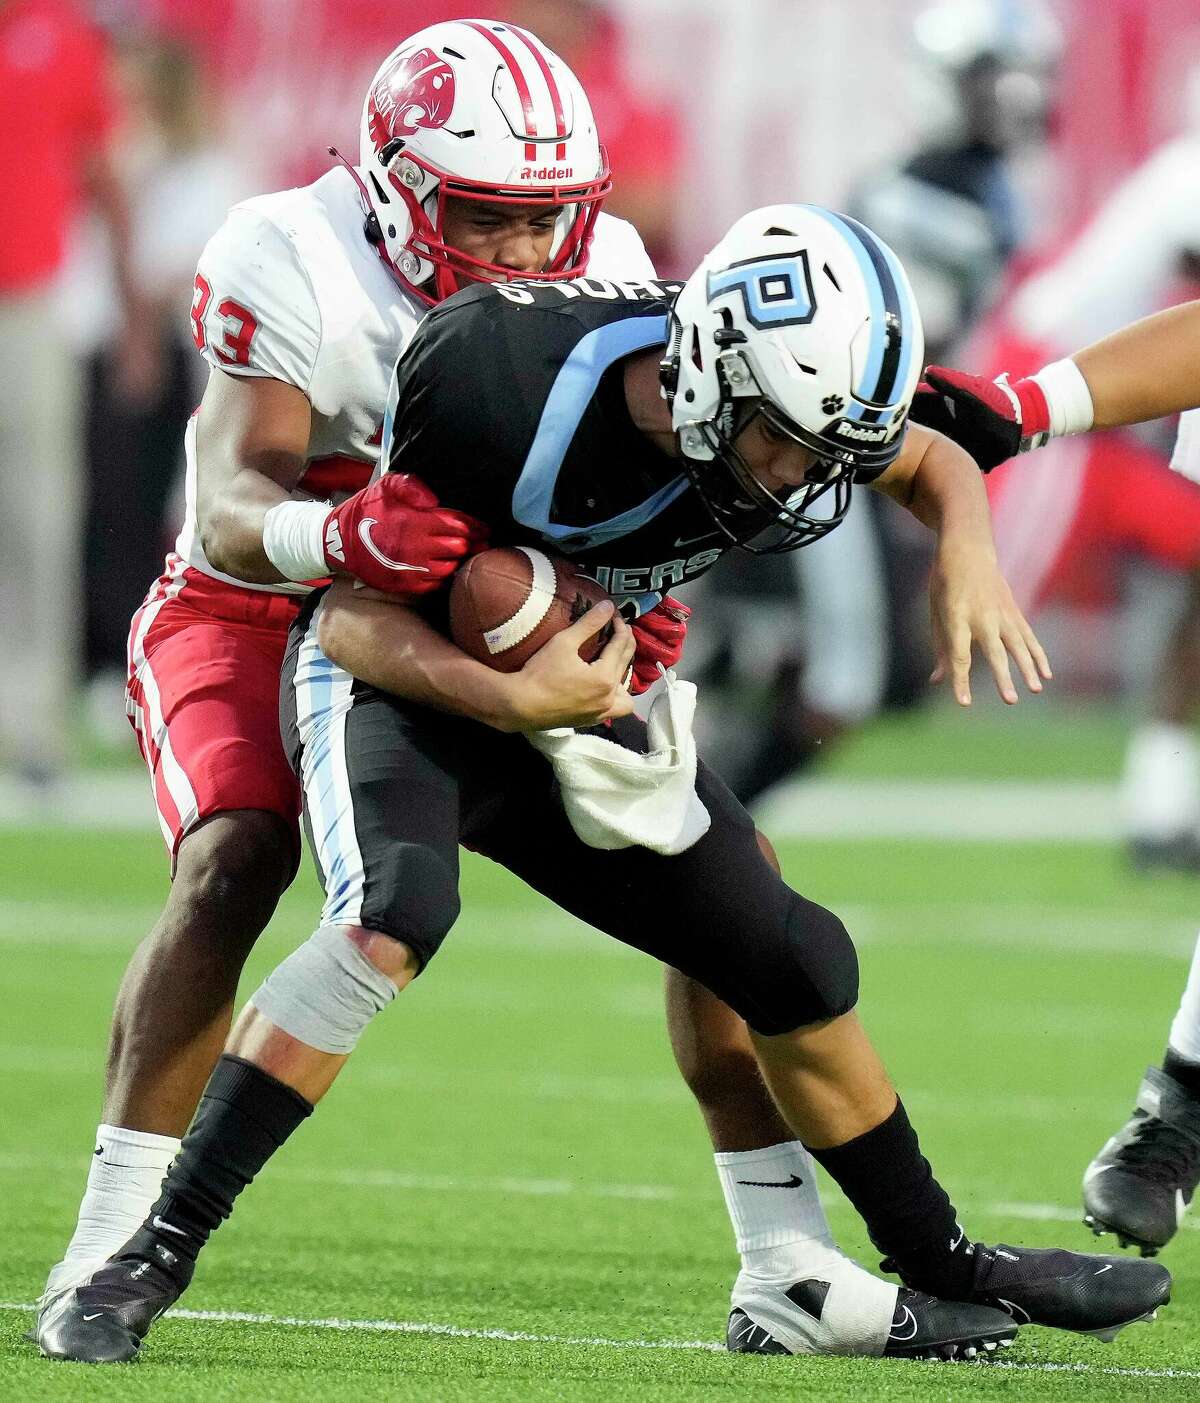 Katy linebacker Damian Neveaux, left, sacks Paetow quarterback Brock Nichols during the first half of a high school football game, Thursday, Oct. 6, 2022, in Katy.